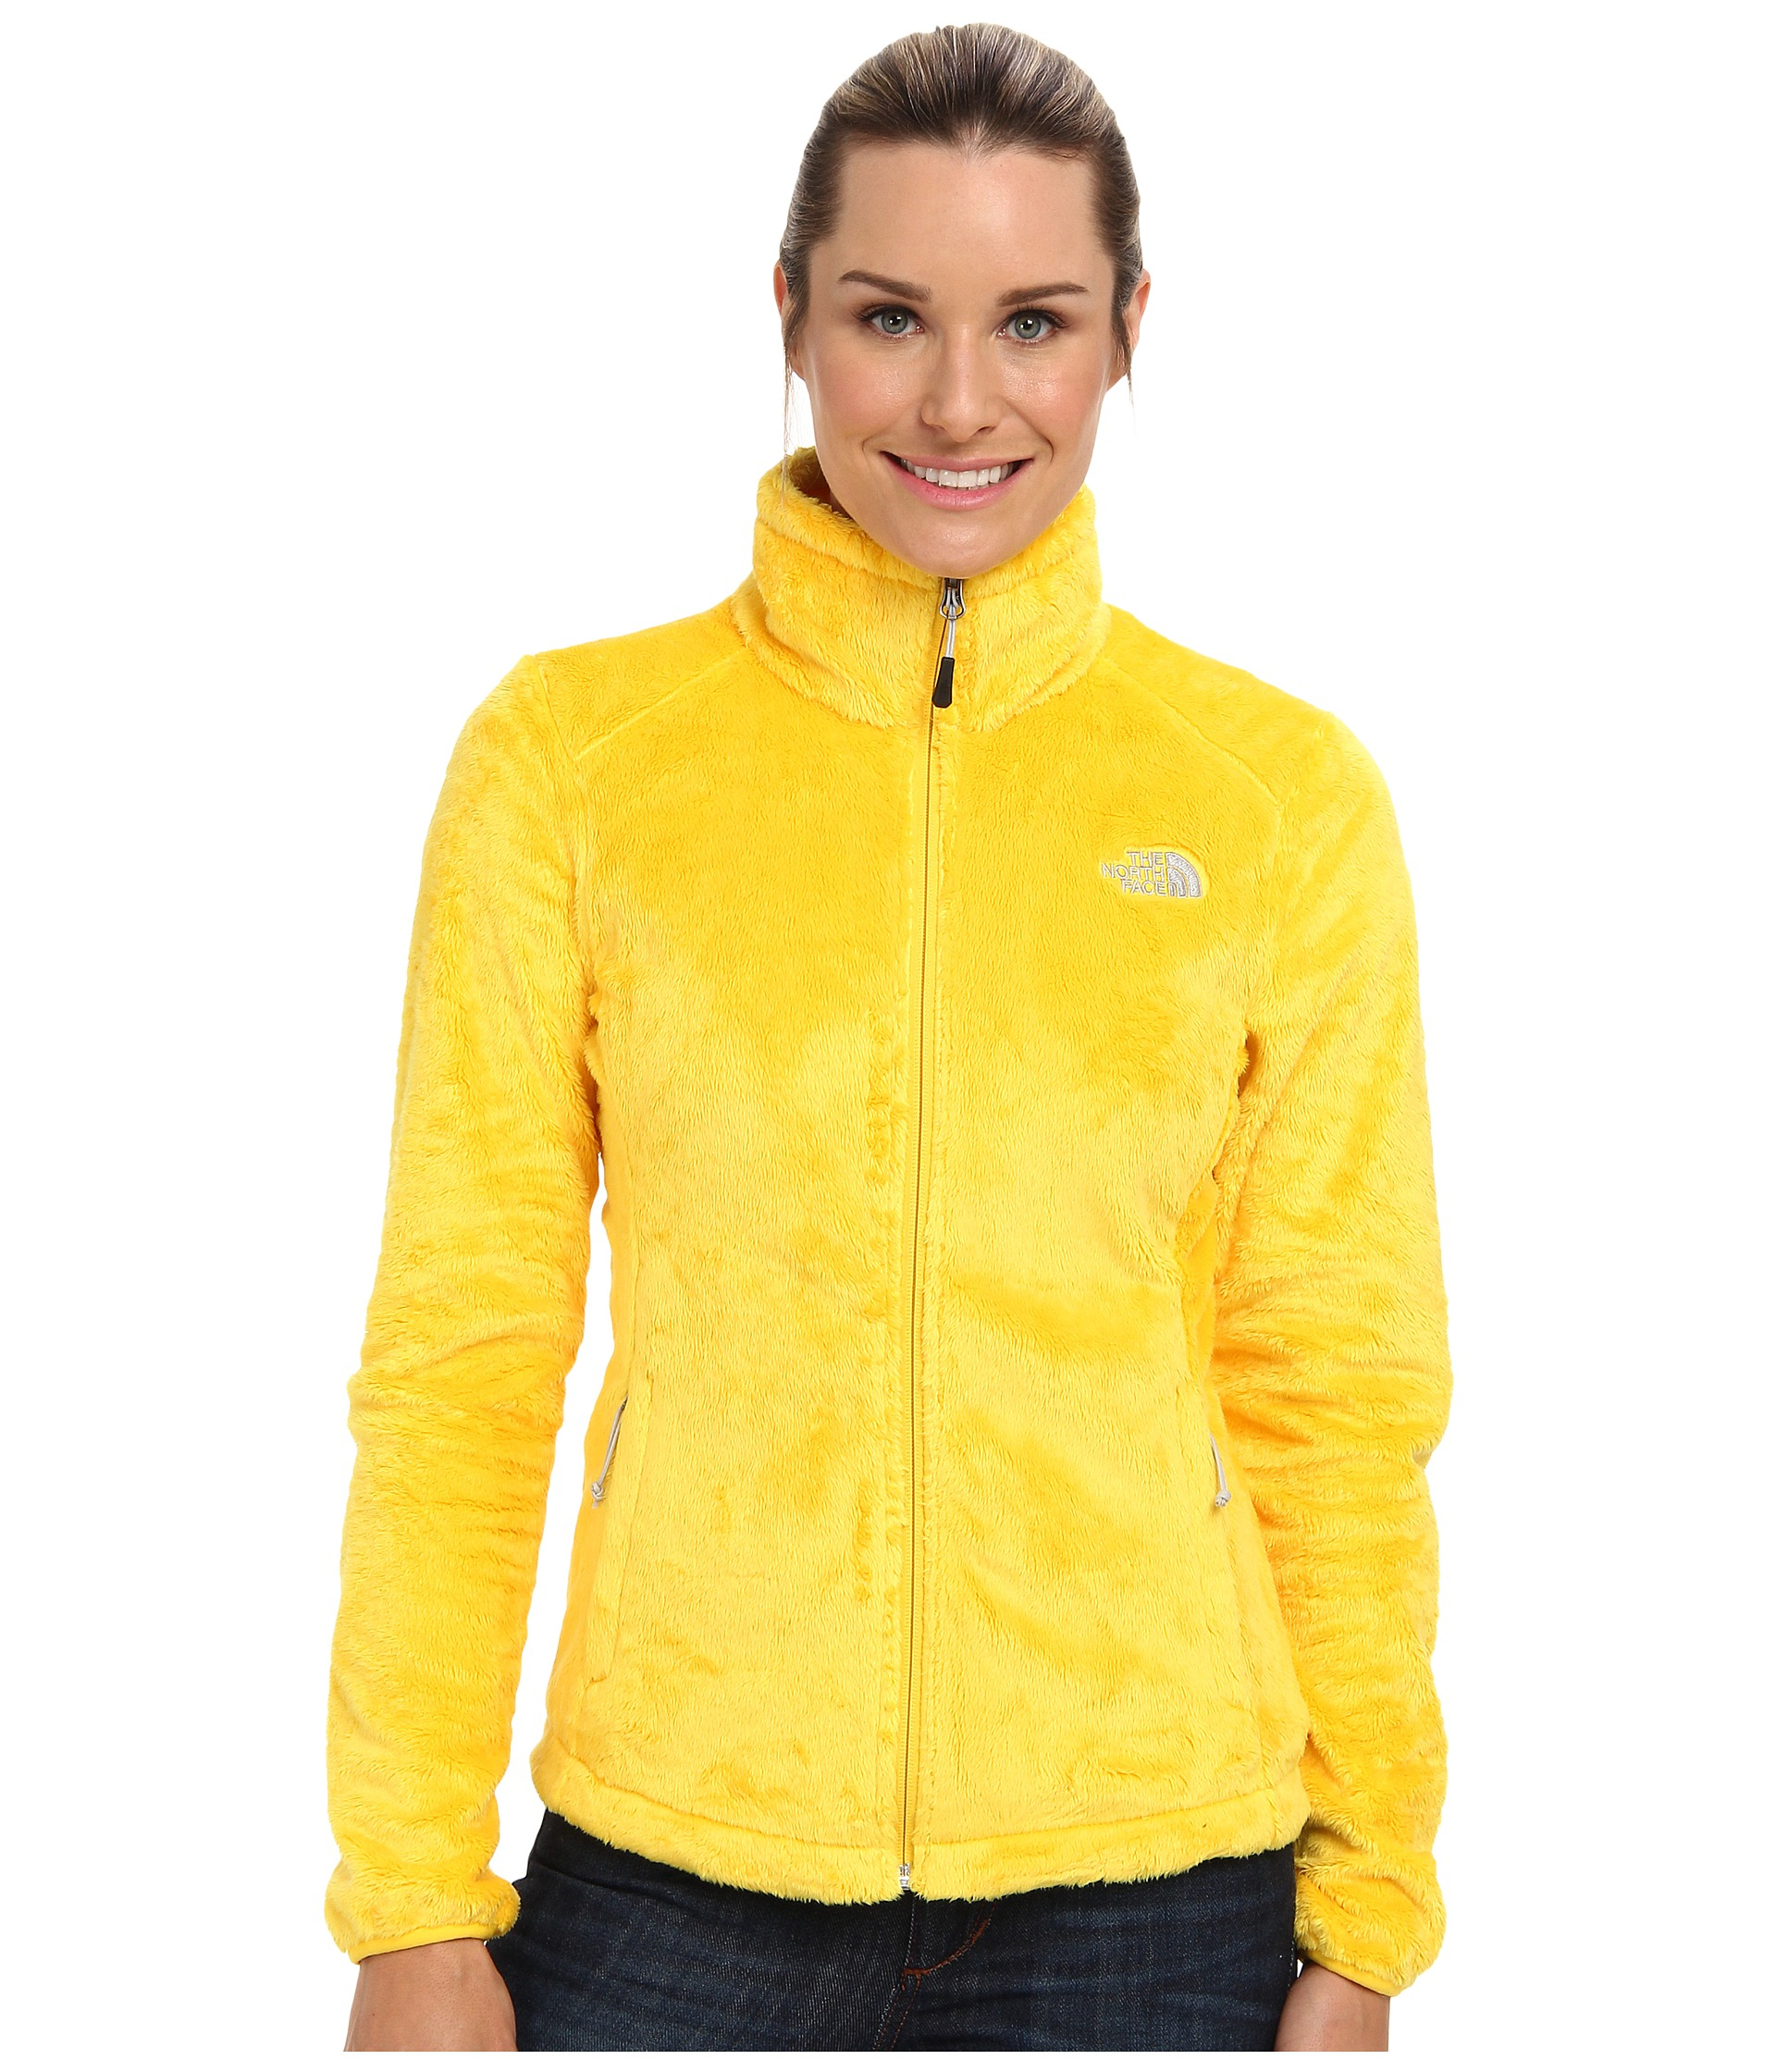 Lyst - The North Face Osito 2 Jacket in Yellow